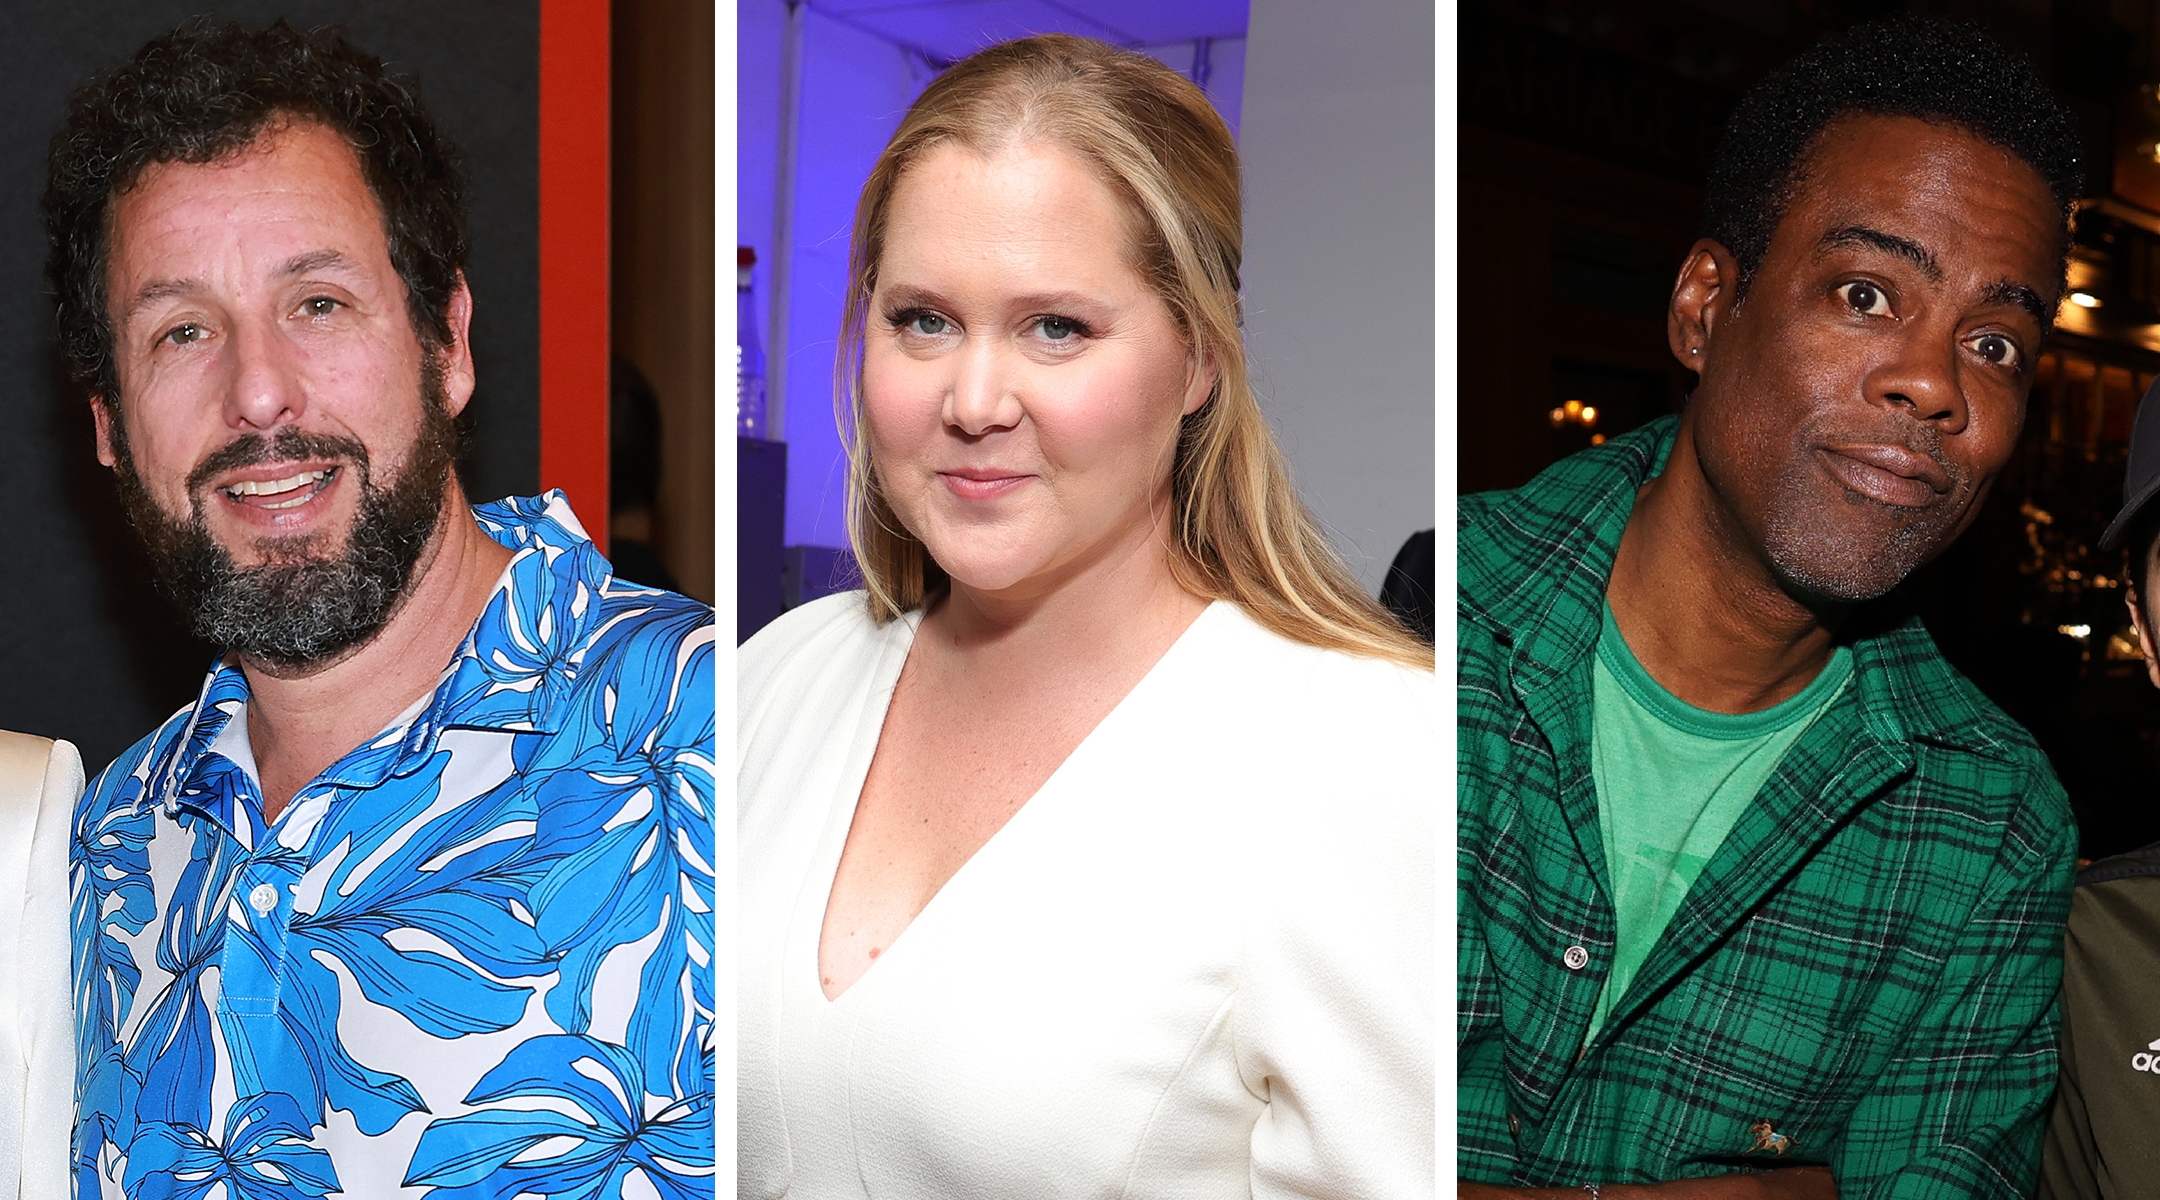 Adam Sandler, Amy Schumer and Chris Rock are just a few of the high-profile celebrities who signed a letter about the hostages being held in Gaza. (Getty Images)